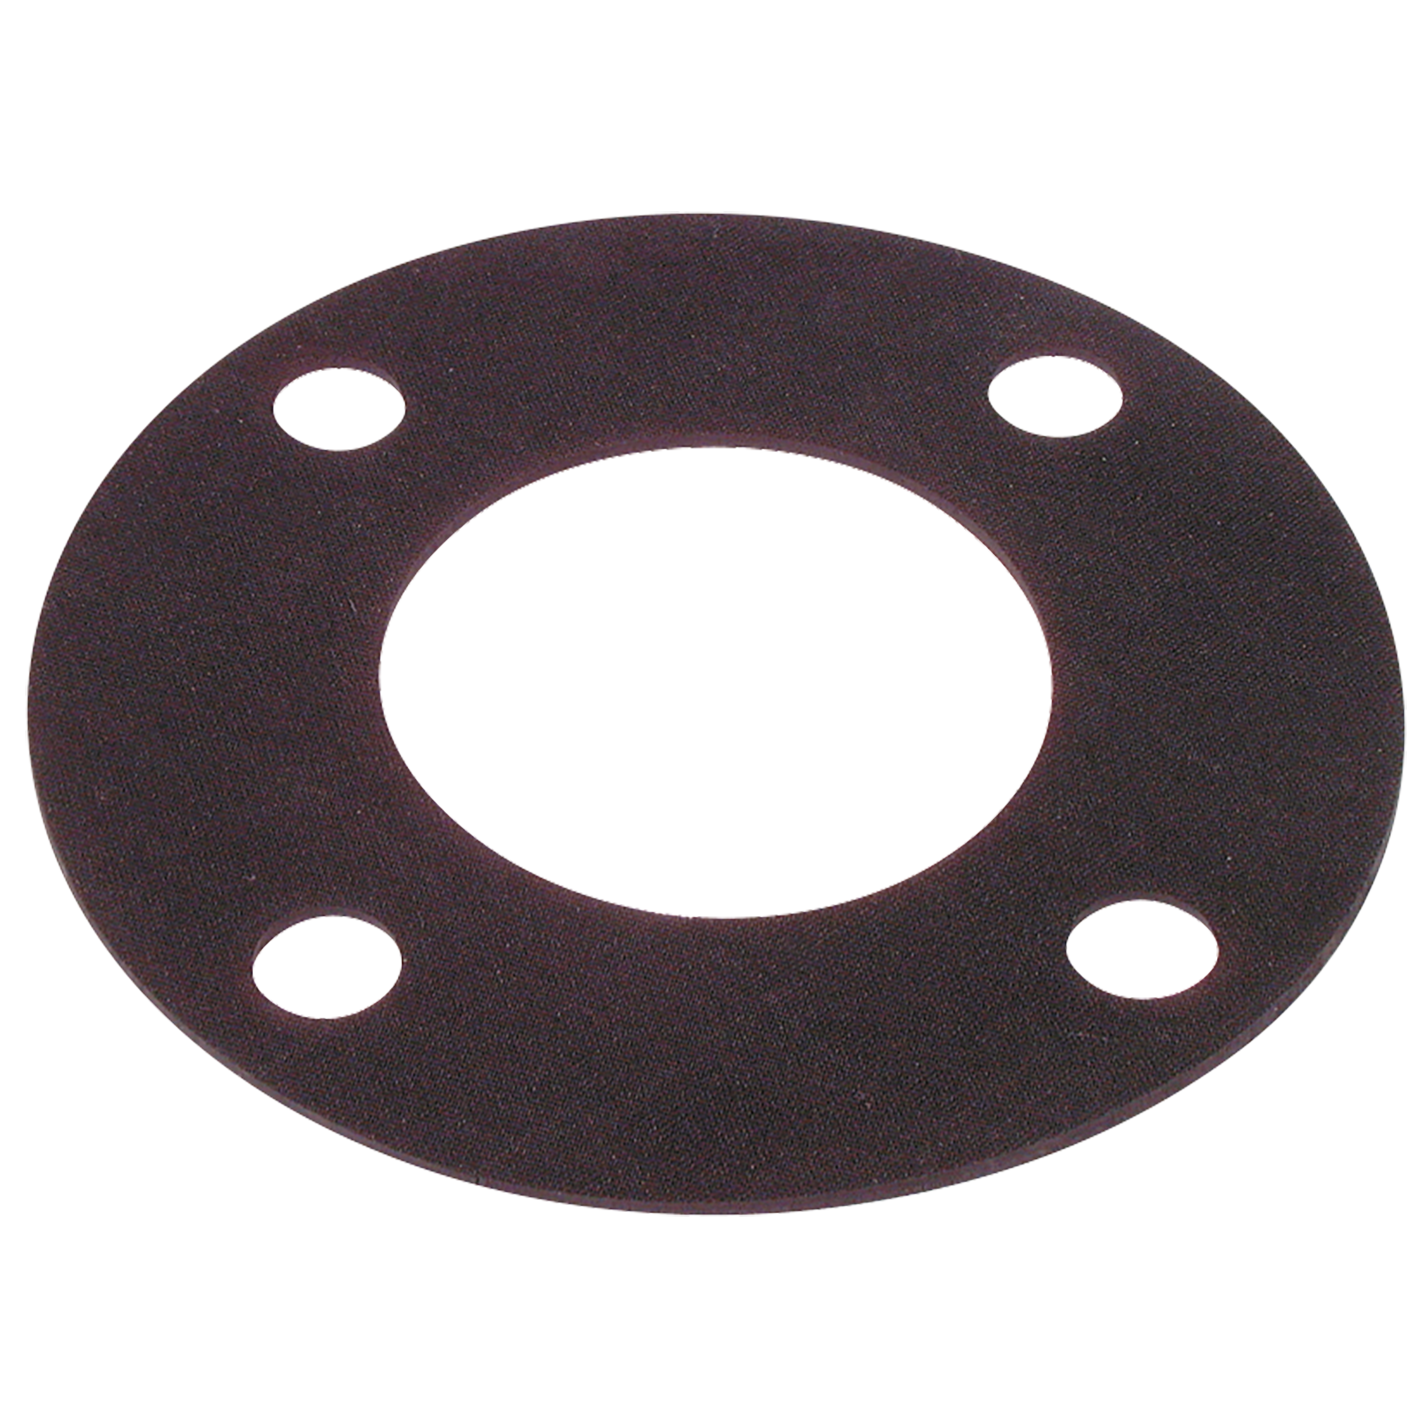 6" SIZE EPDM GASKET TABLE E BS10